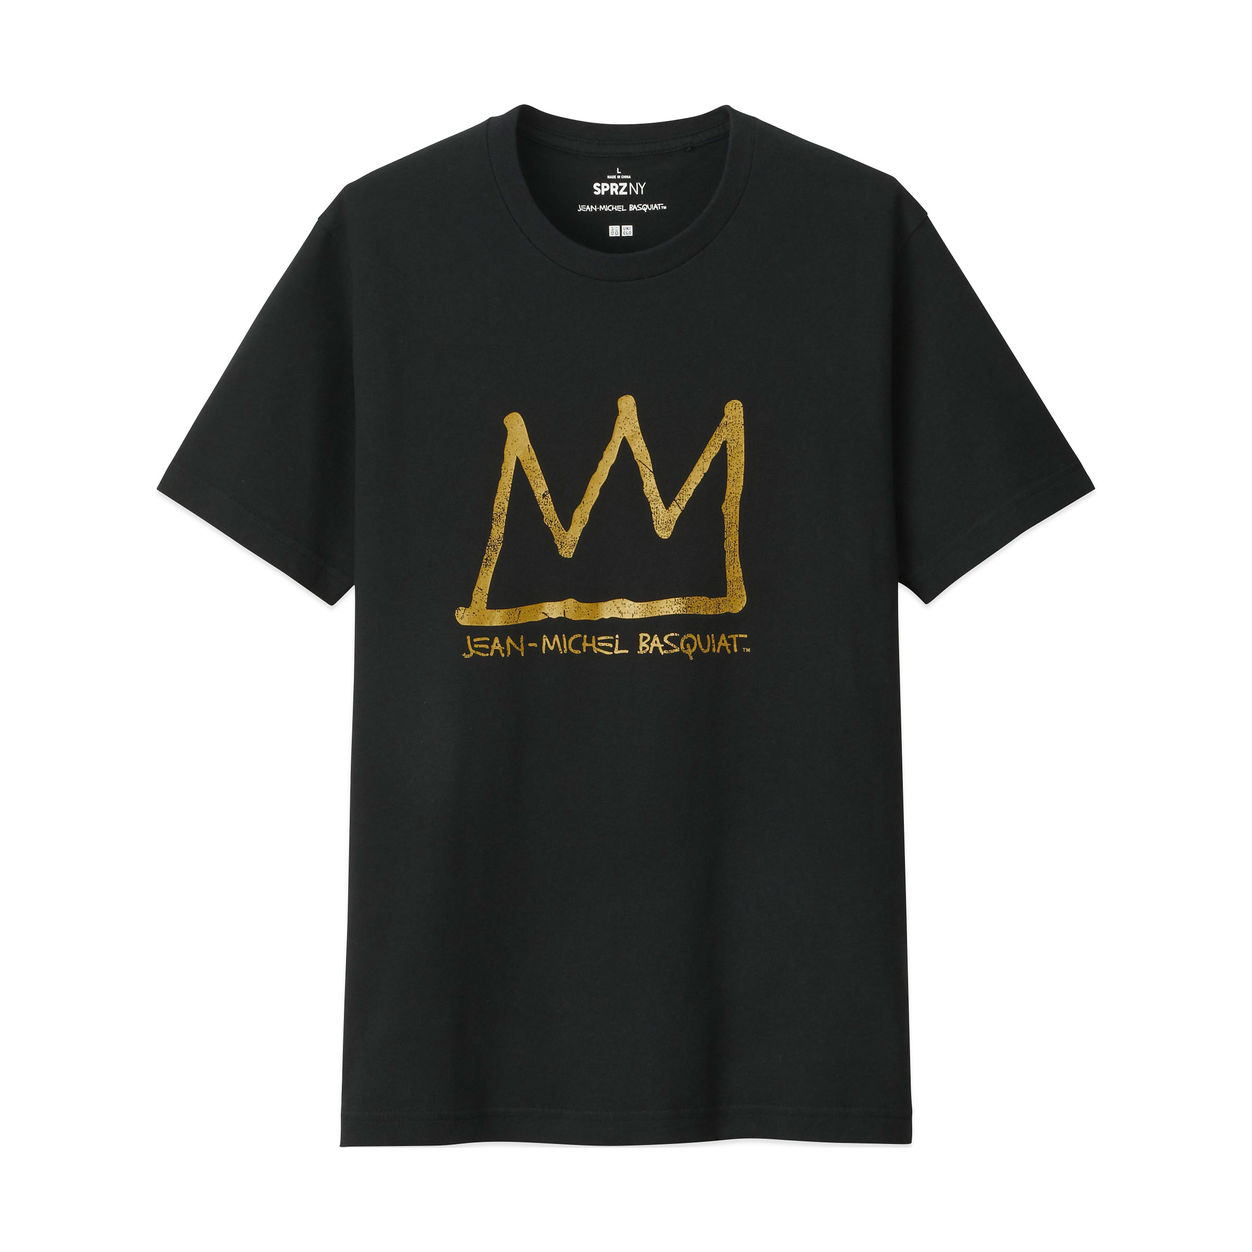 Cool affordable gifts under $15: Basquiat Crown tee from MoMA